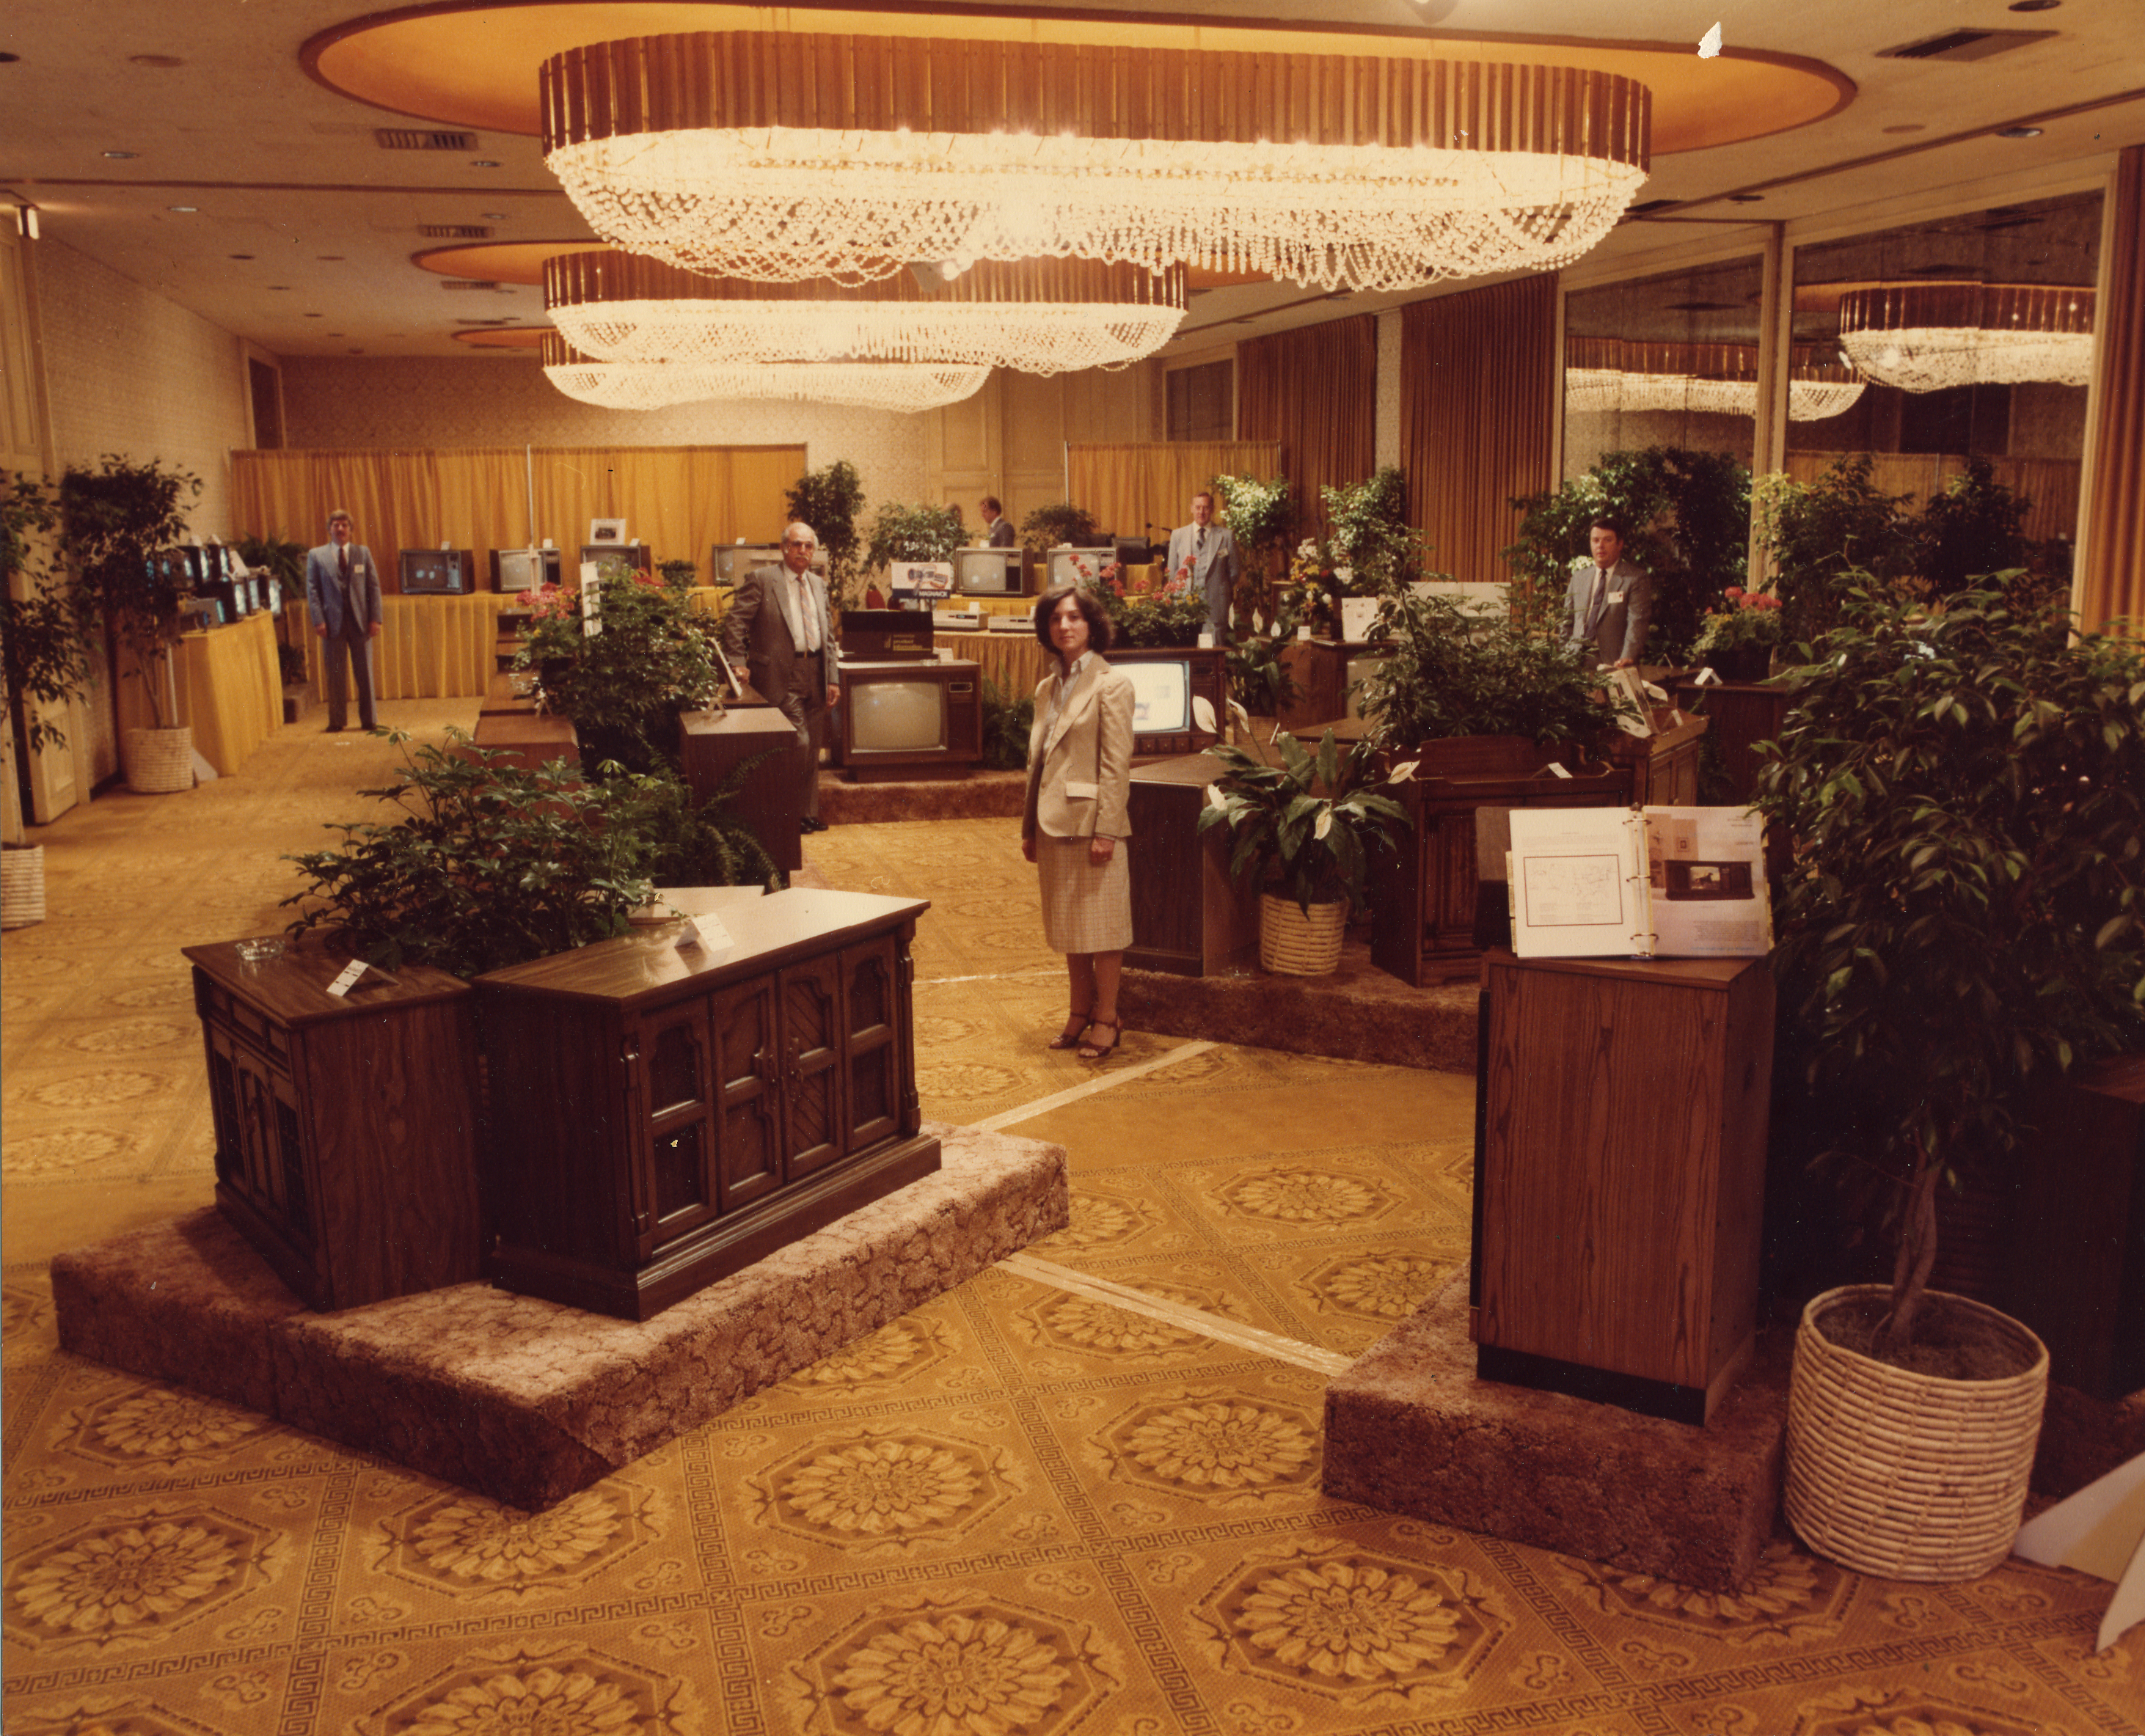 Archive photo of a Magnavox sales room from The Colonnade's early days. 